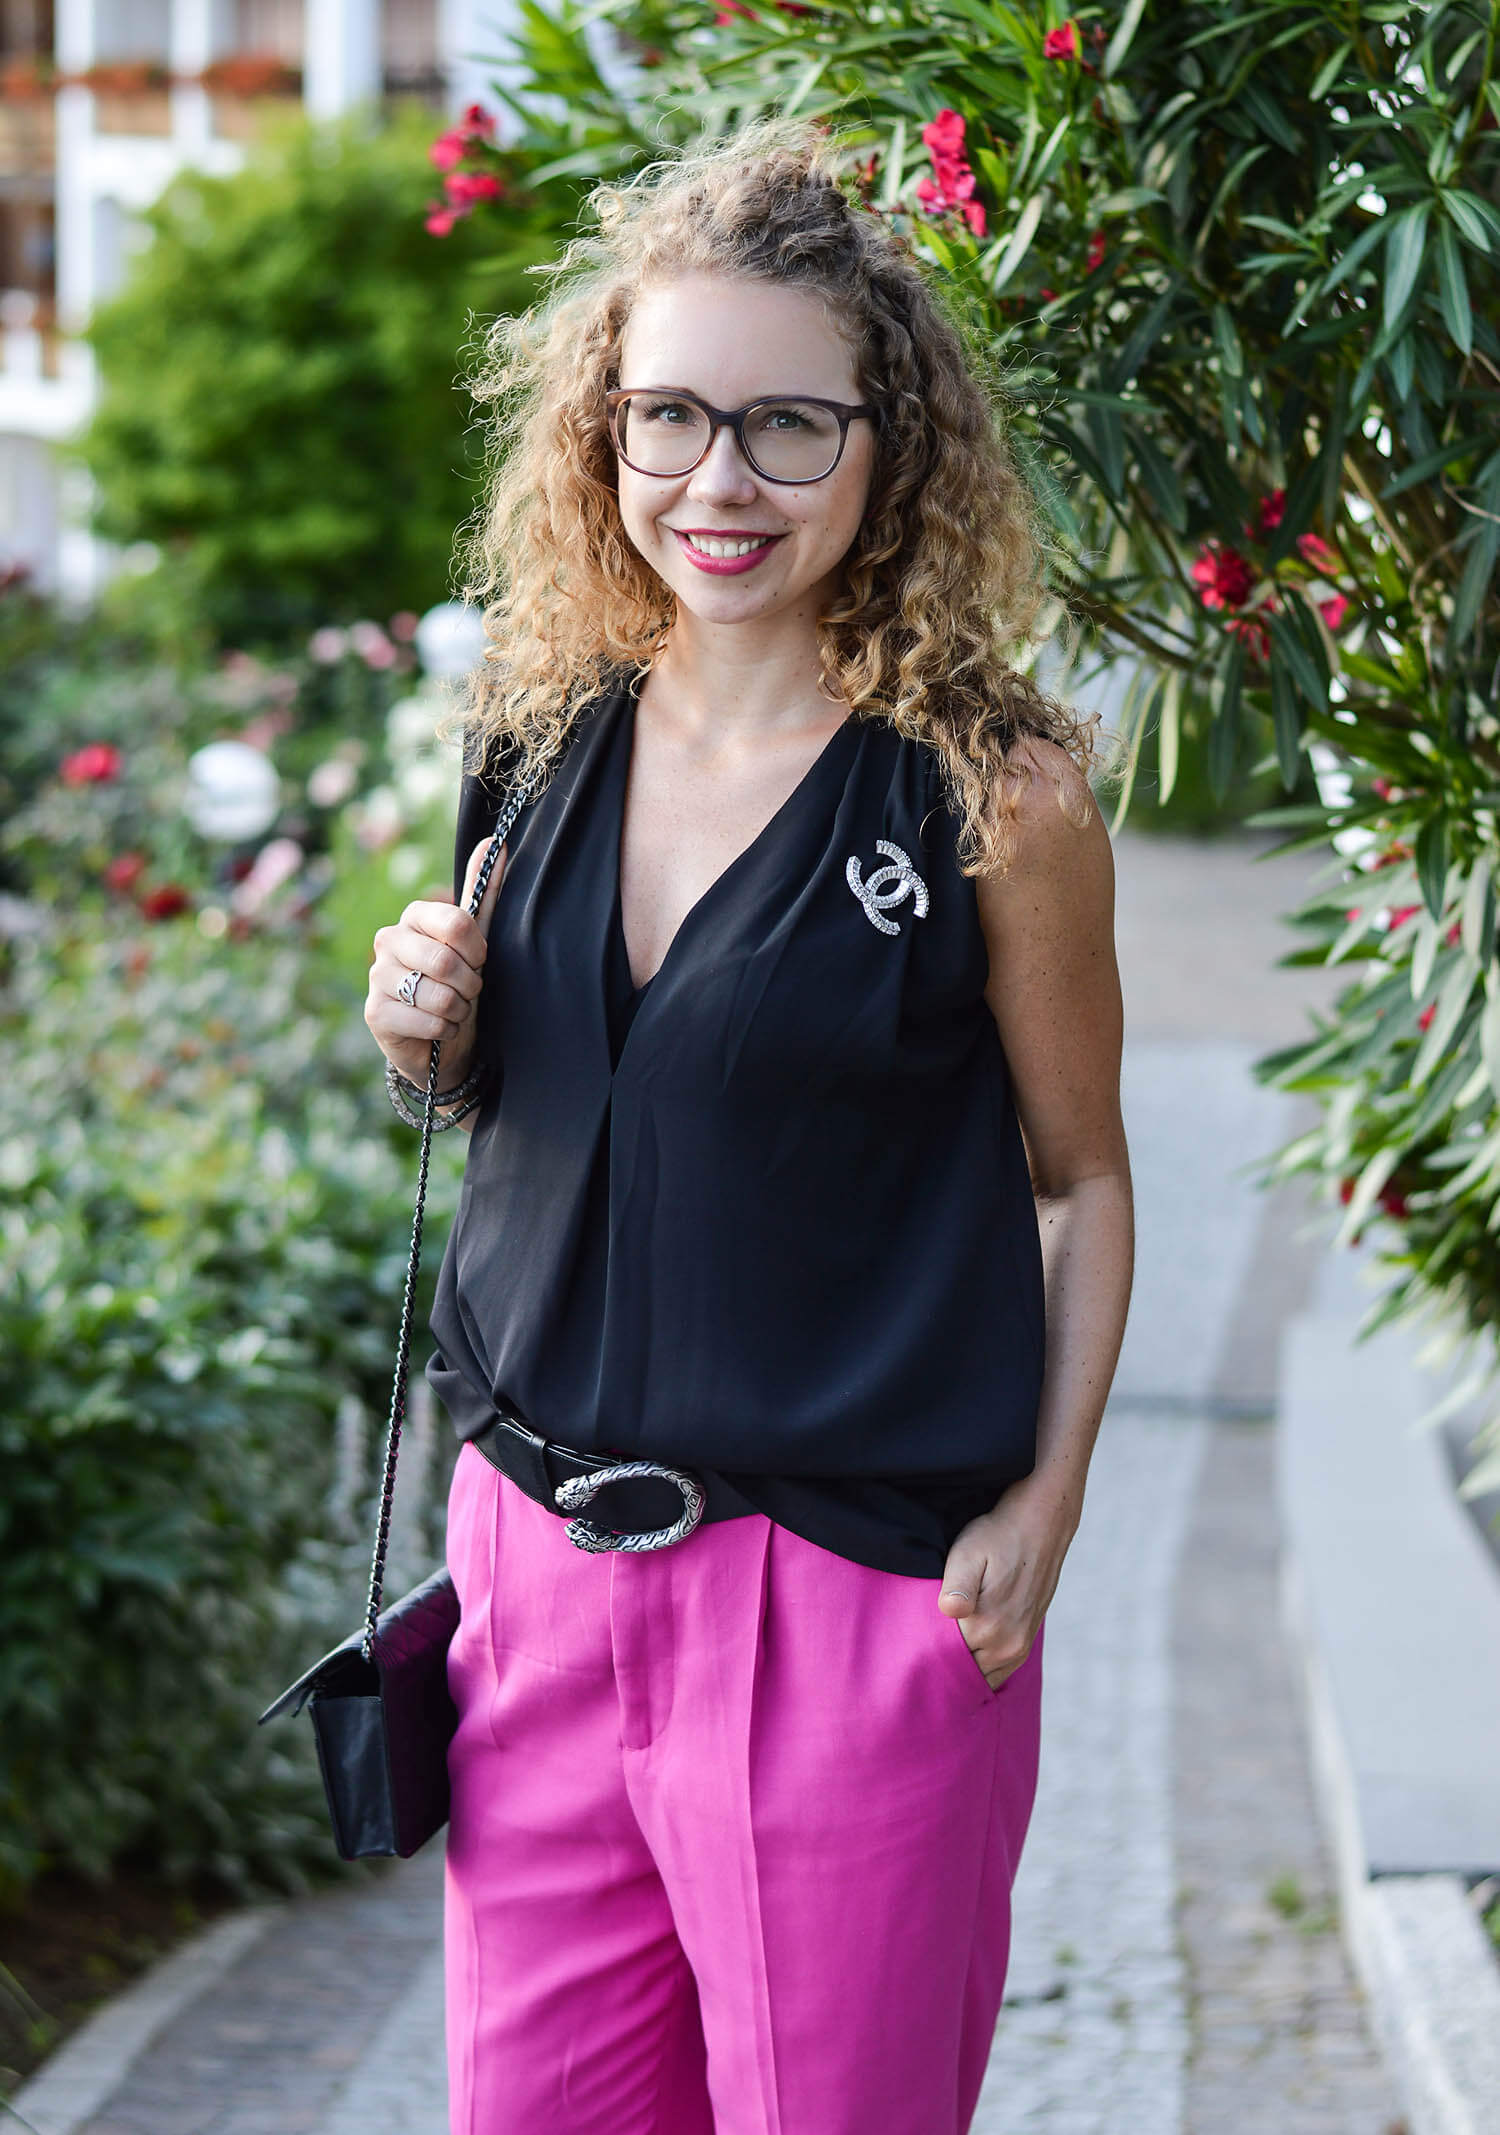 kationette-fashionblog-nrw-Outfit-Pink-Pants-Gucci-Belt-Chanel-Bag-South-Tyrol